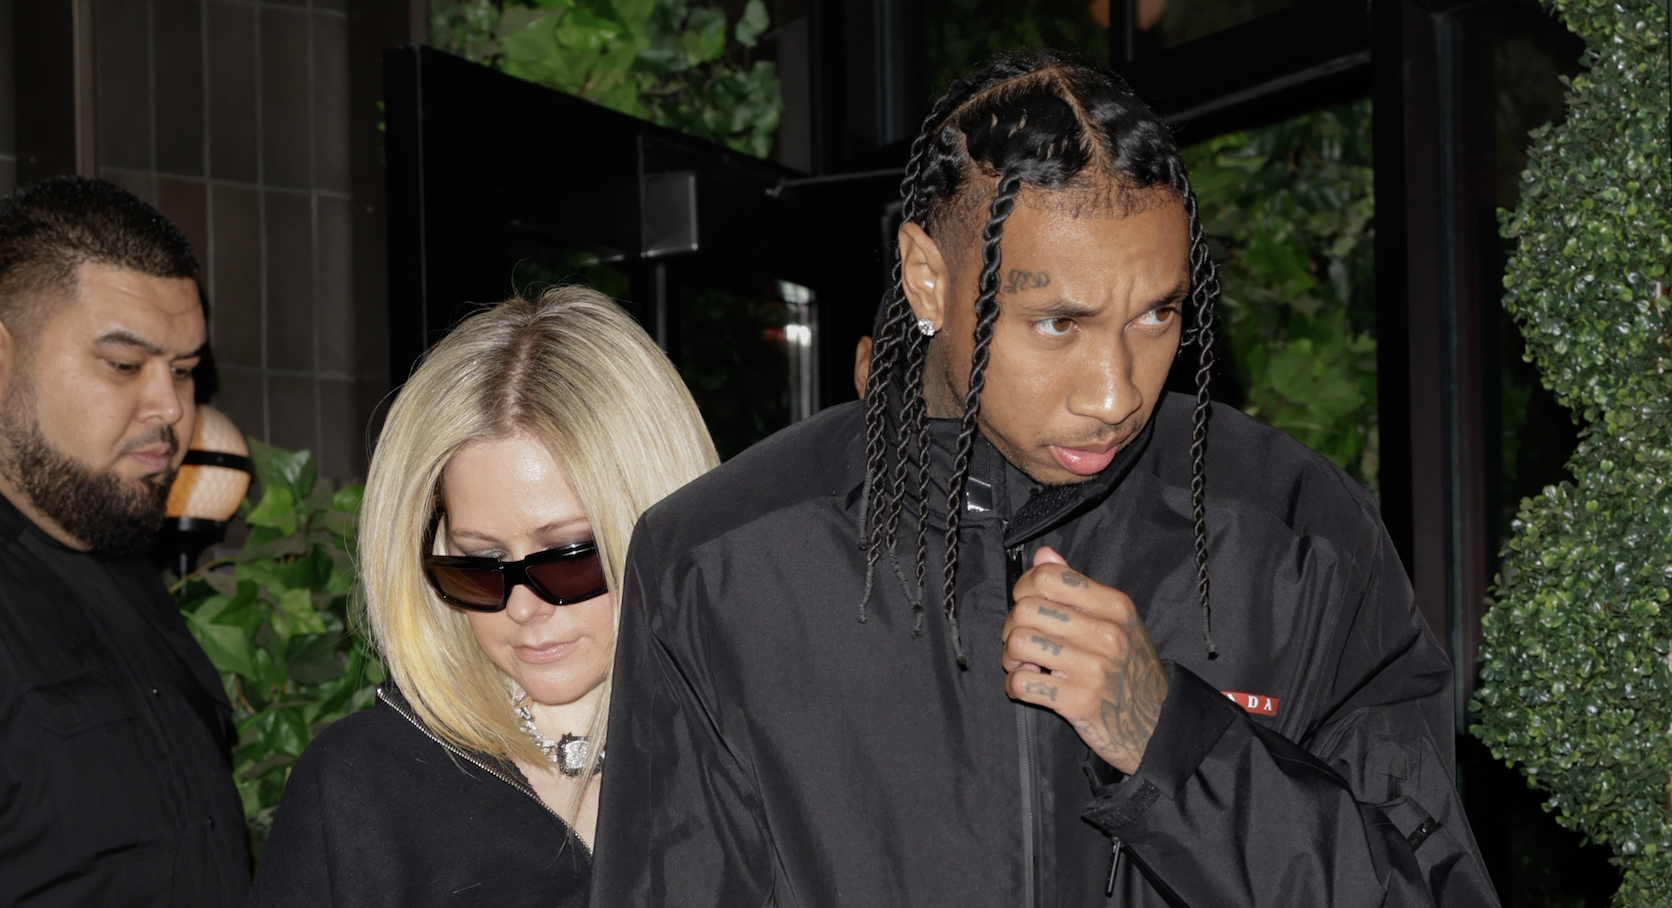 Avril Lavigne Steps Out With Tyga After Mod Sun Fans Chanted “F**k Tyga” At Show